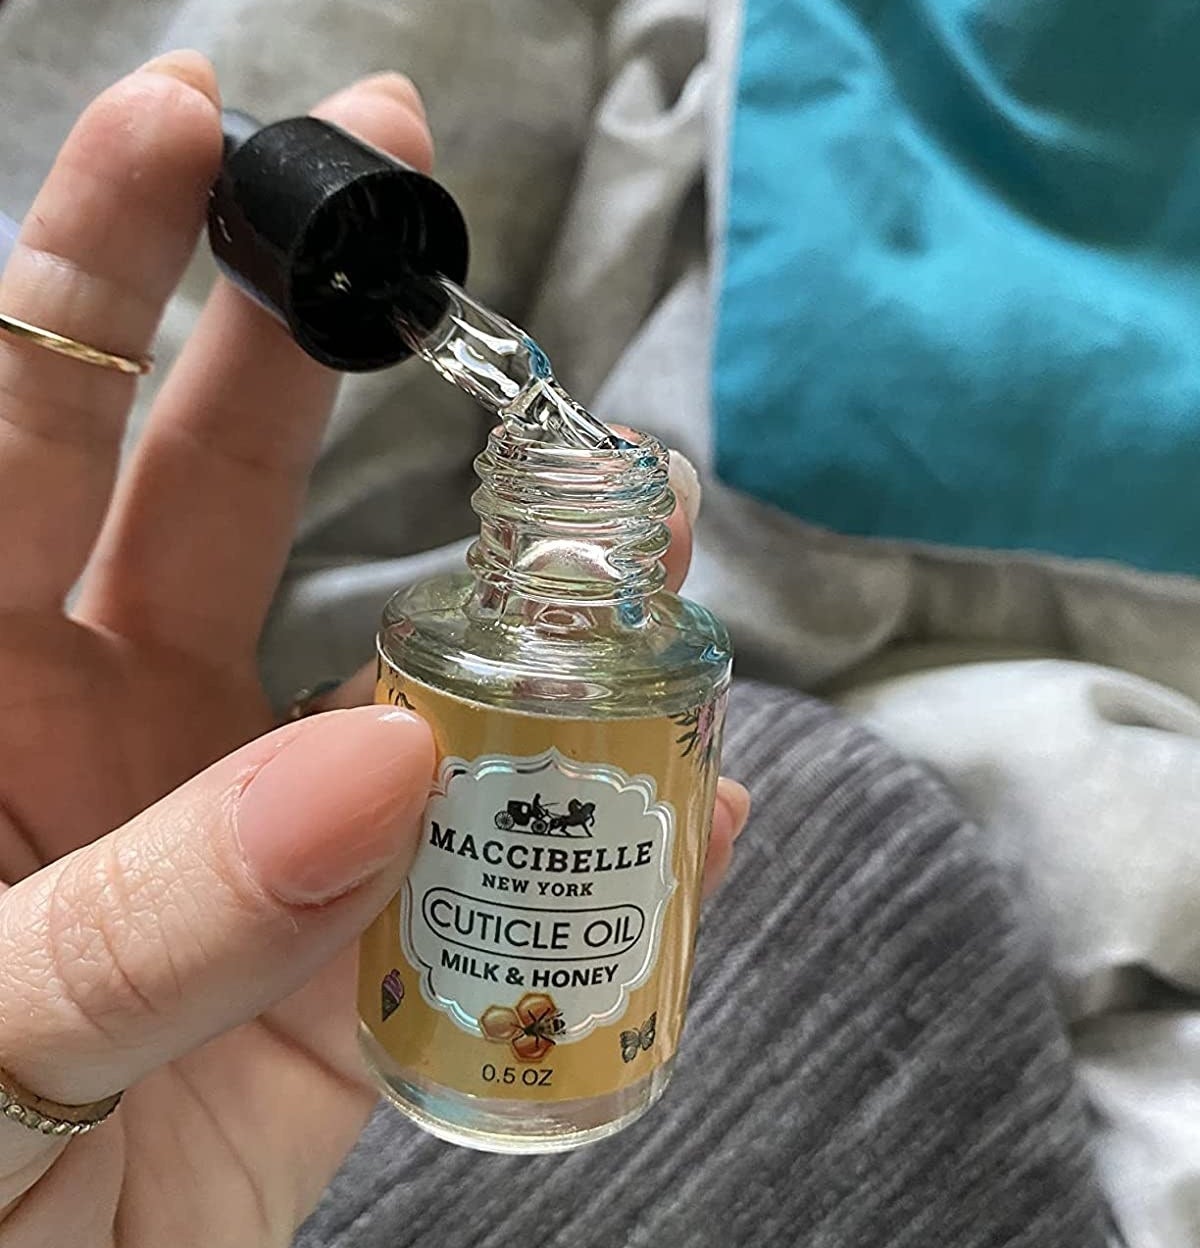 Reviewer holding bottle of cuticle oil